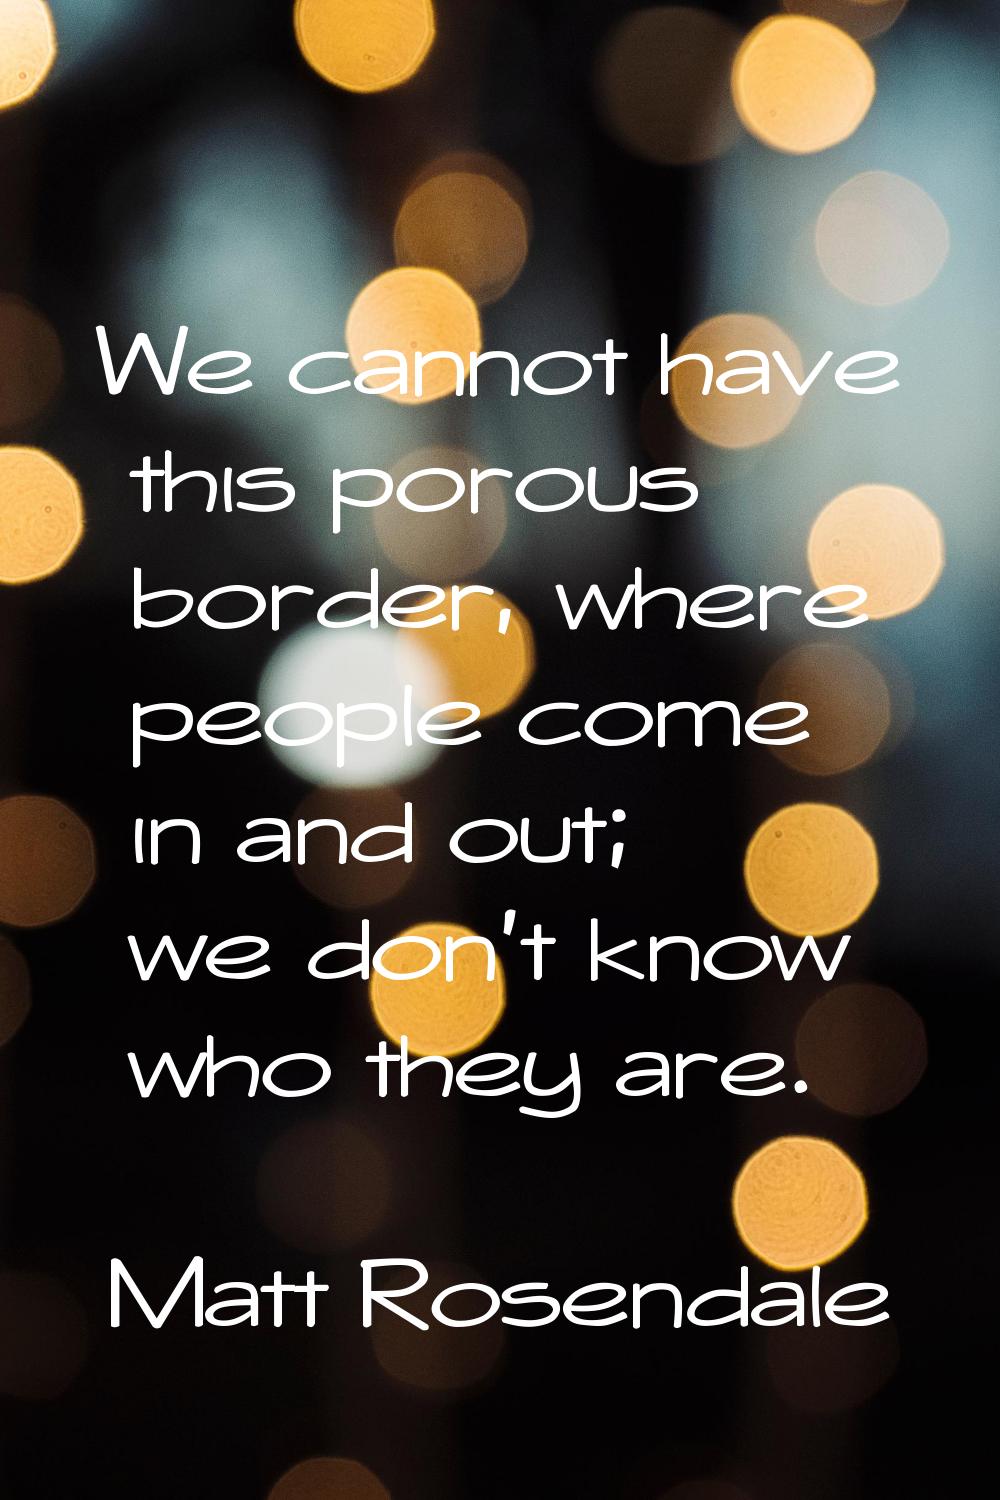 We cannot have this porous border, where people come in and out; we don't know who they are.